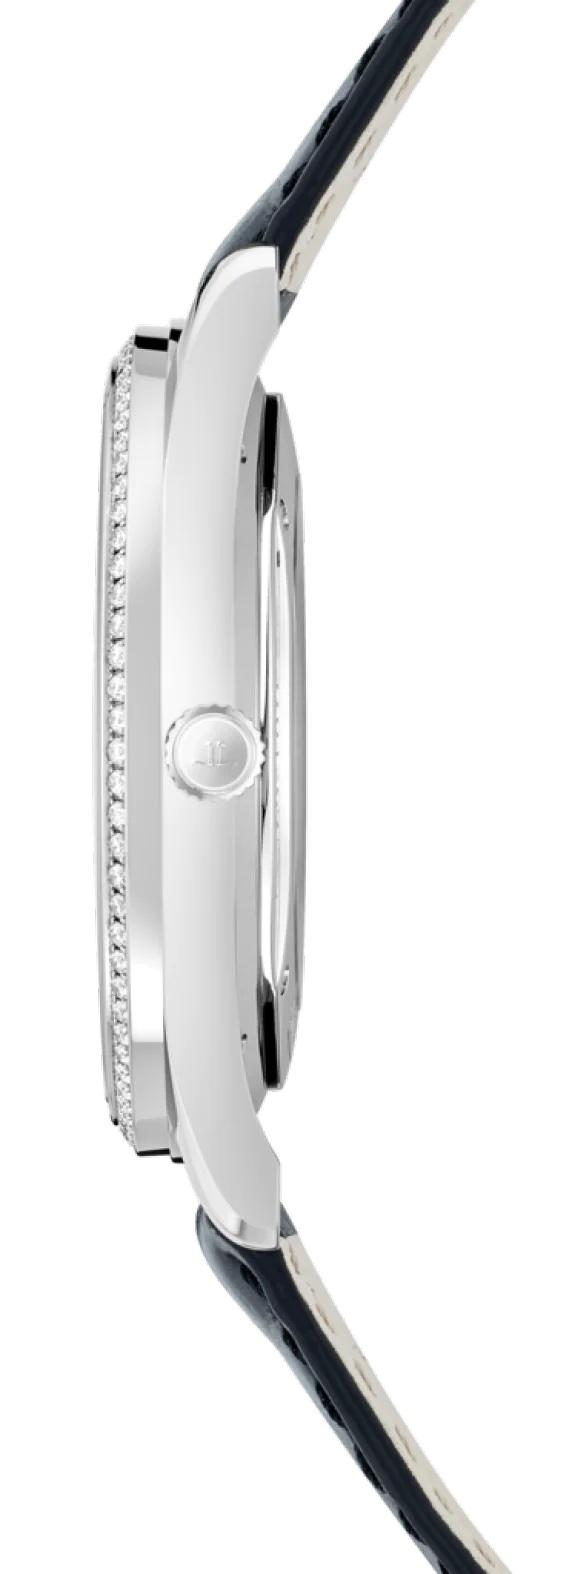 JAEGER-LECOULTRE MASTER ULTRA THIN PERPETUAL 39mm 1303501 Silver